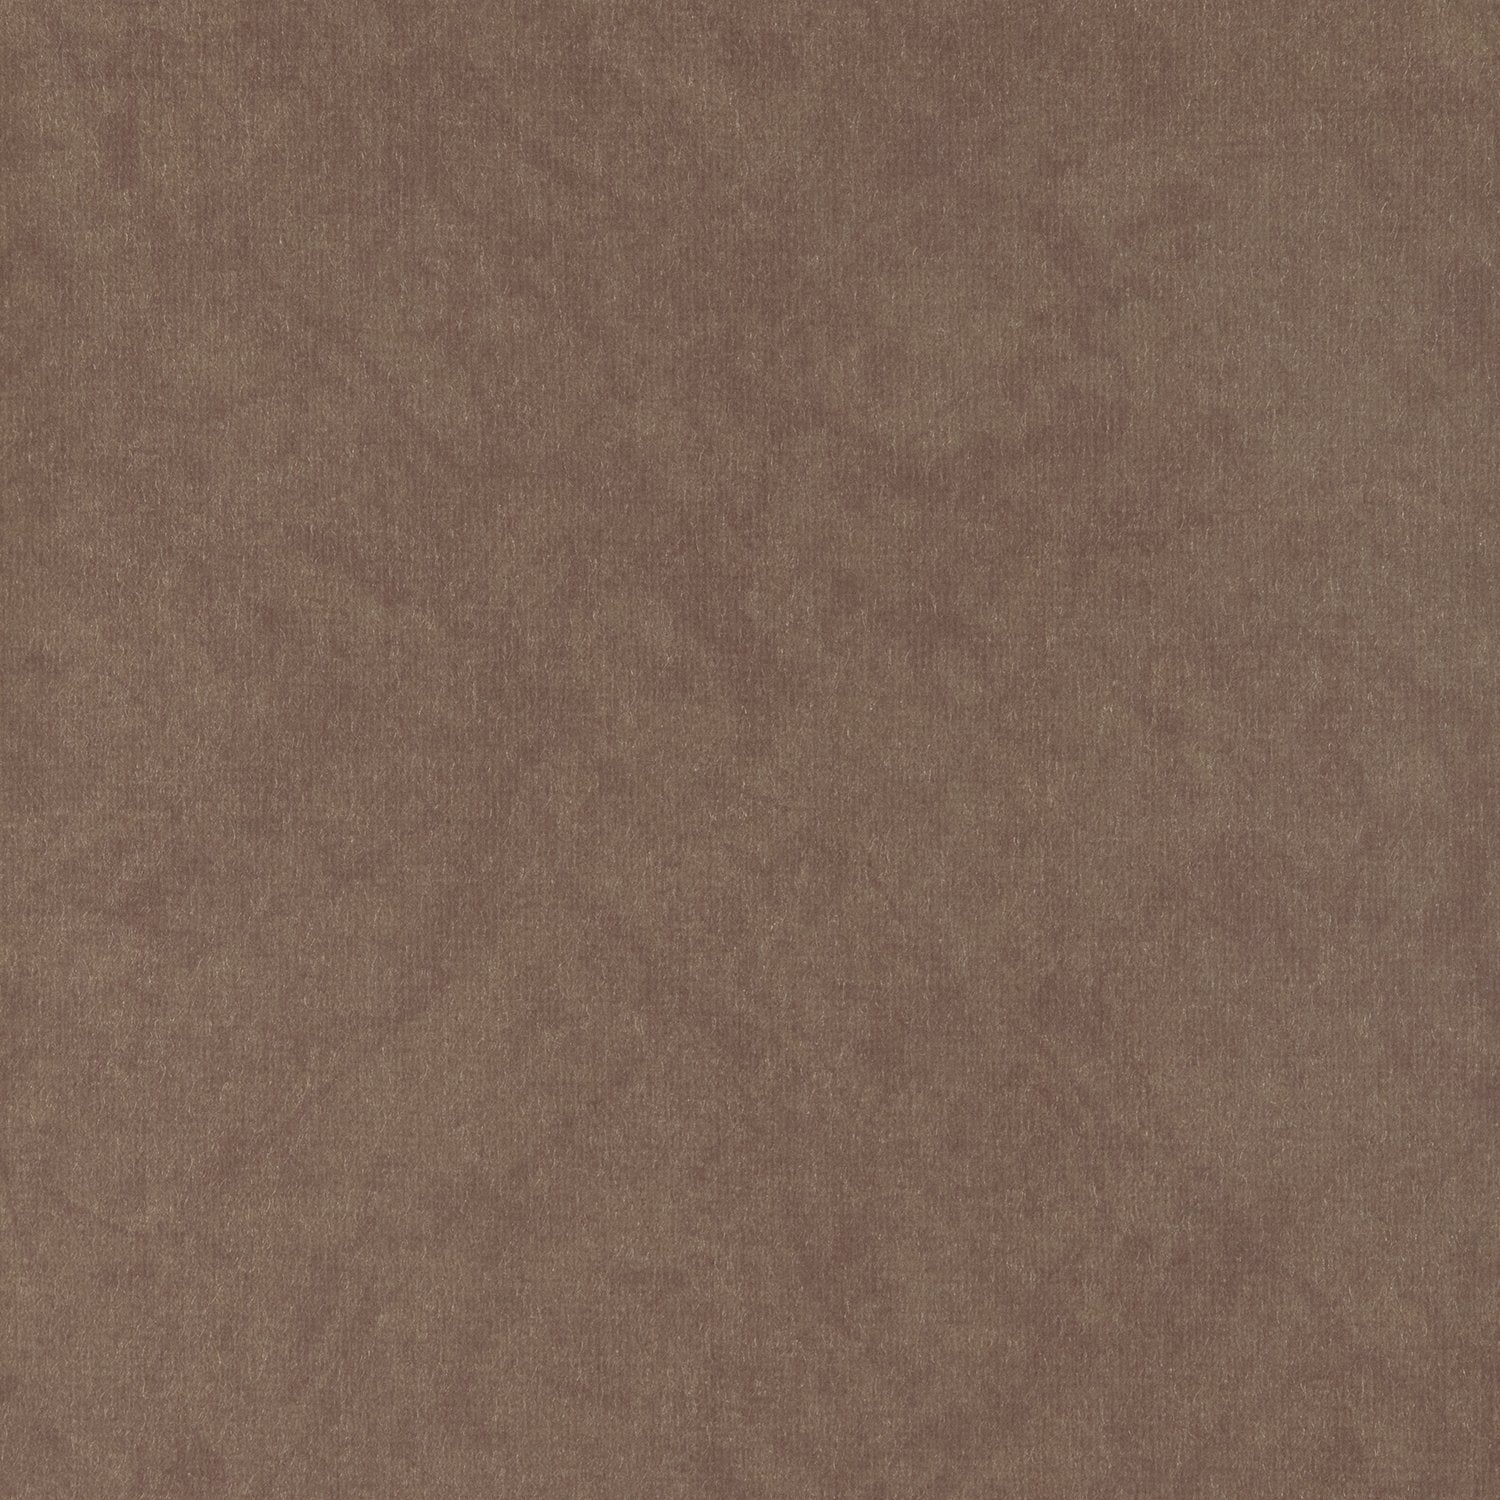 Reflection - Y47251 - Wallcovering - Vycon - Kube Contract